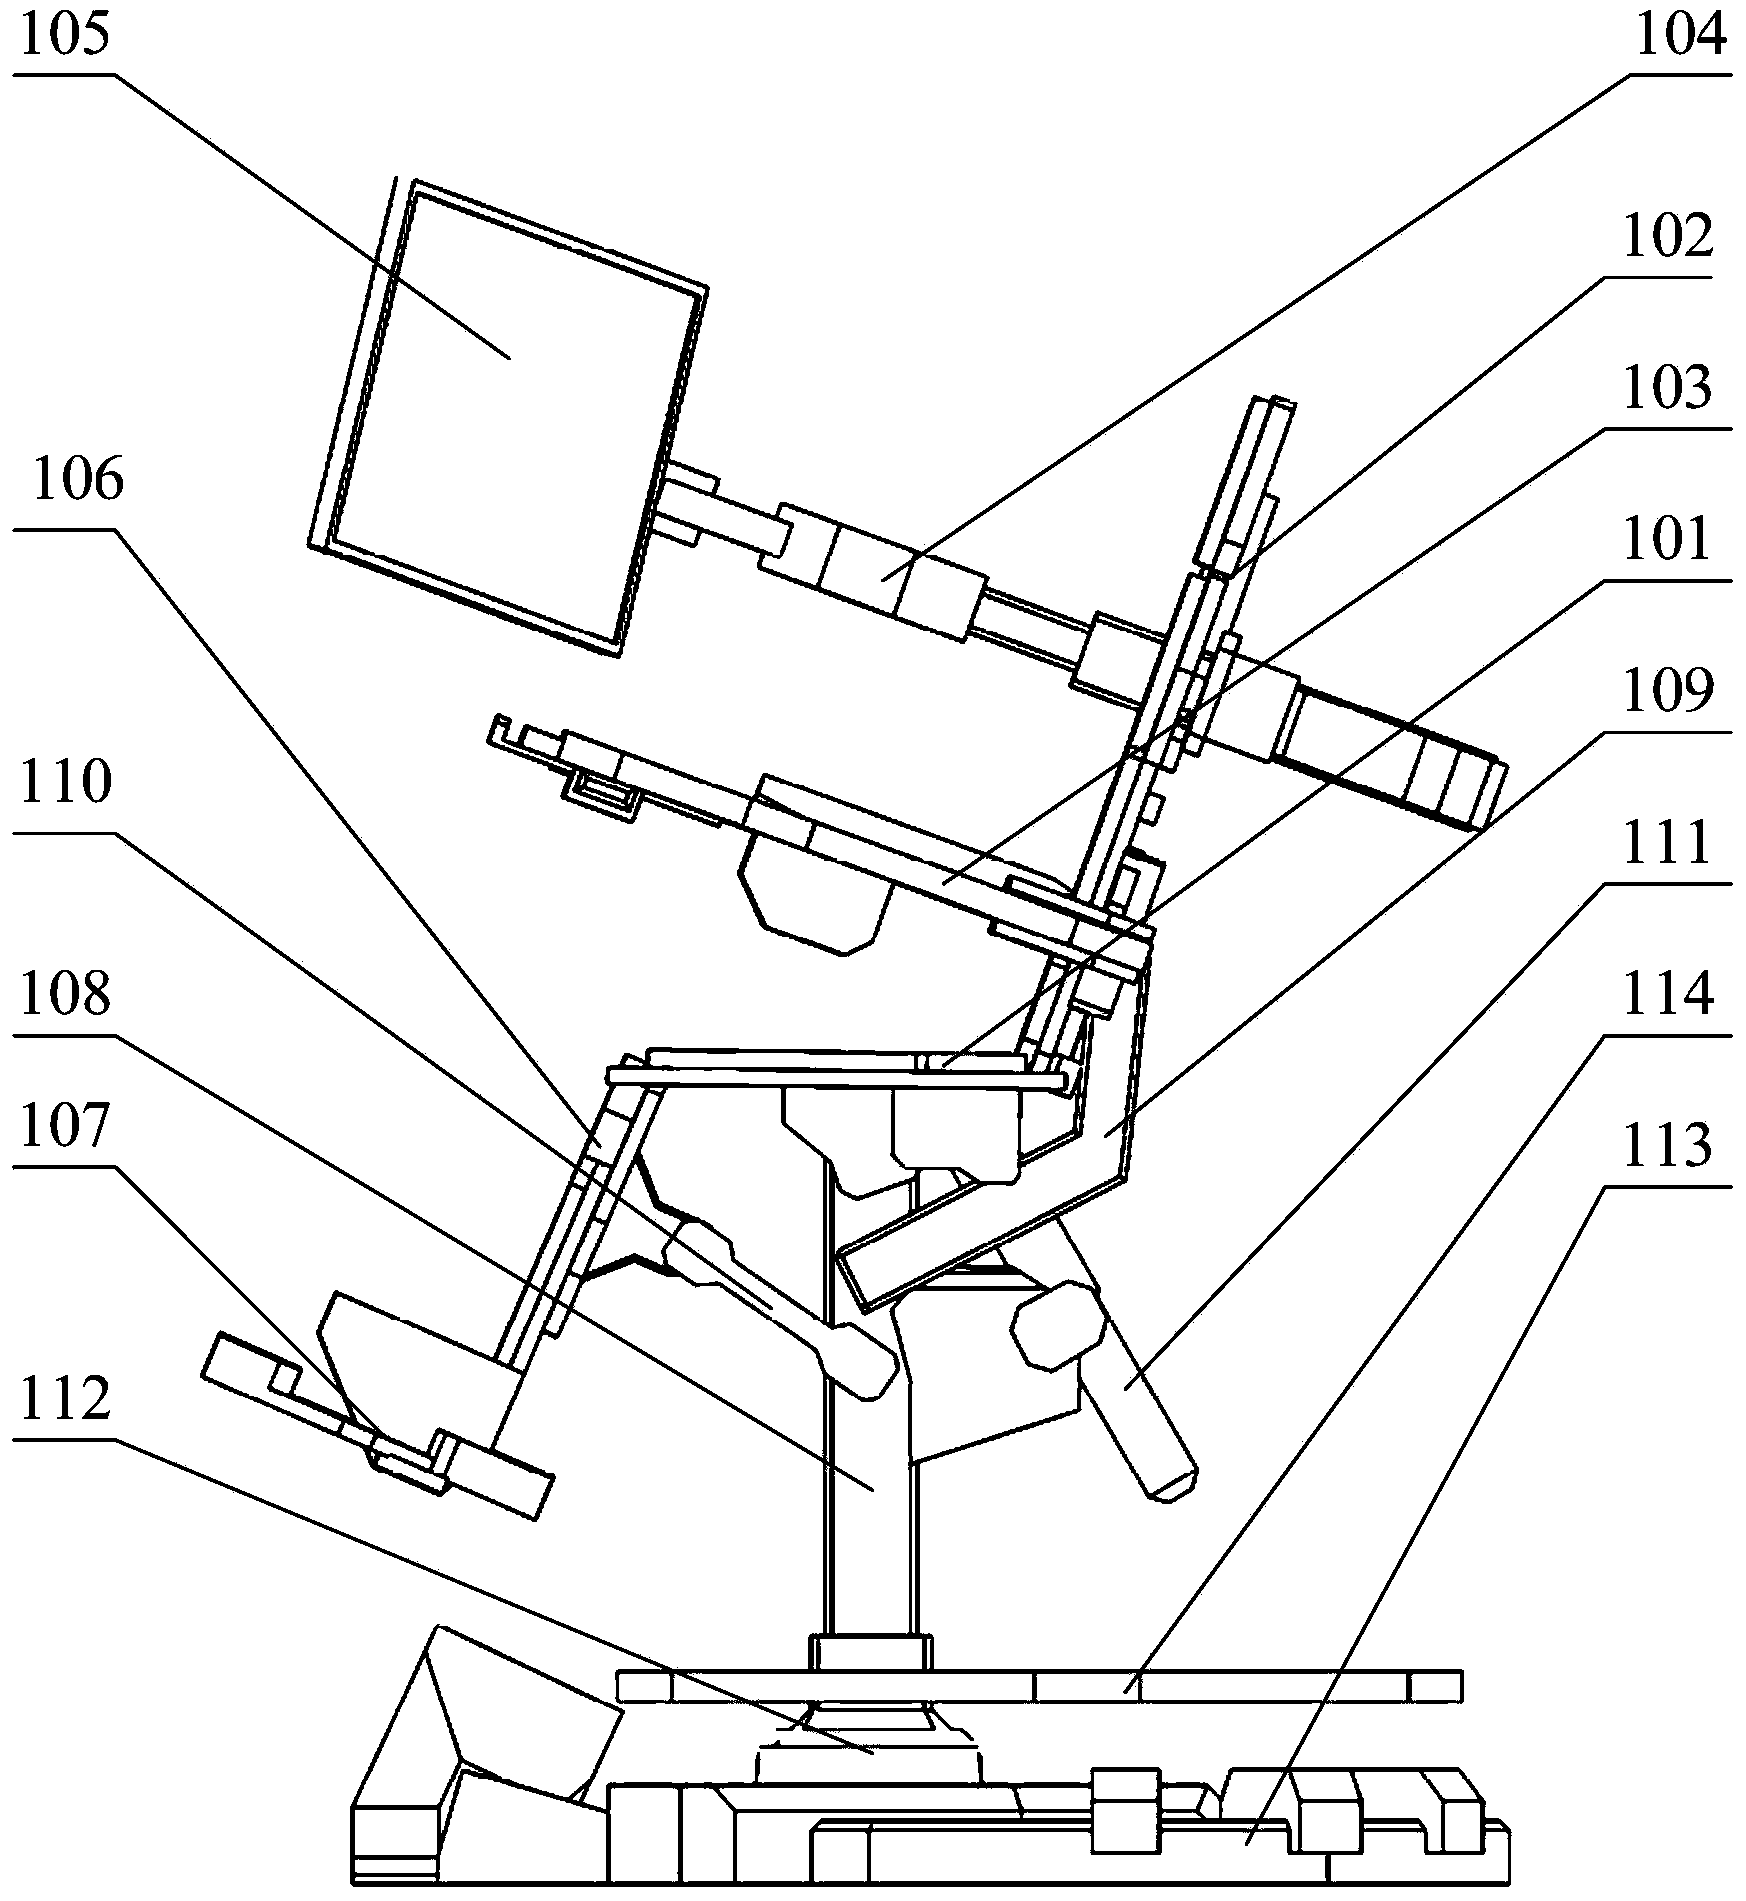 Novel seat with support structure